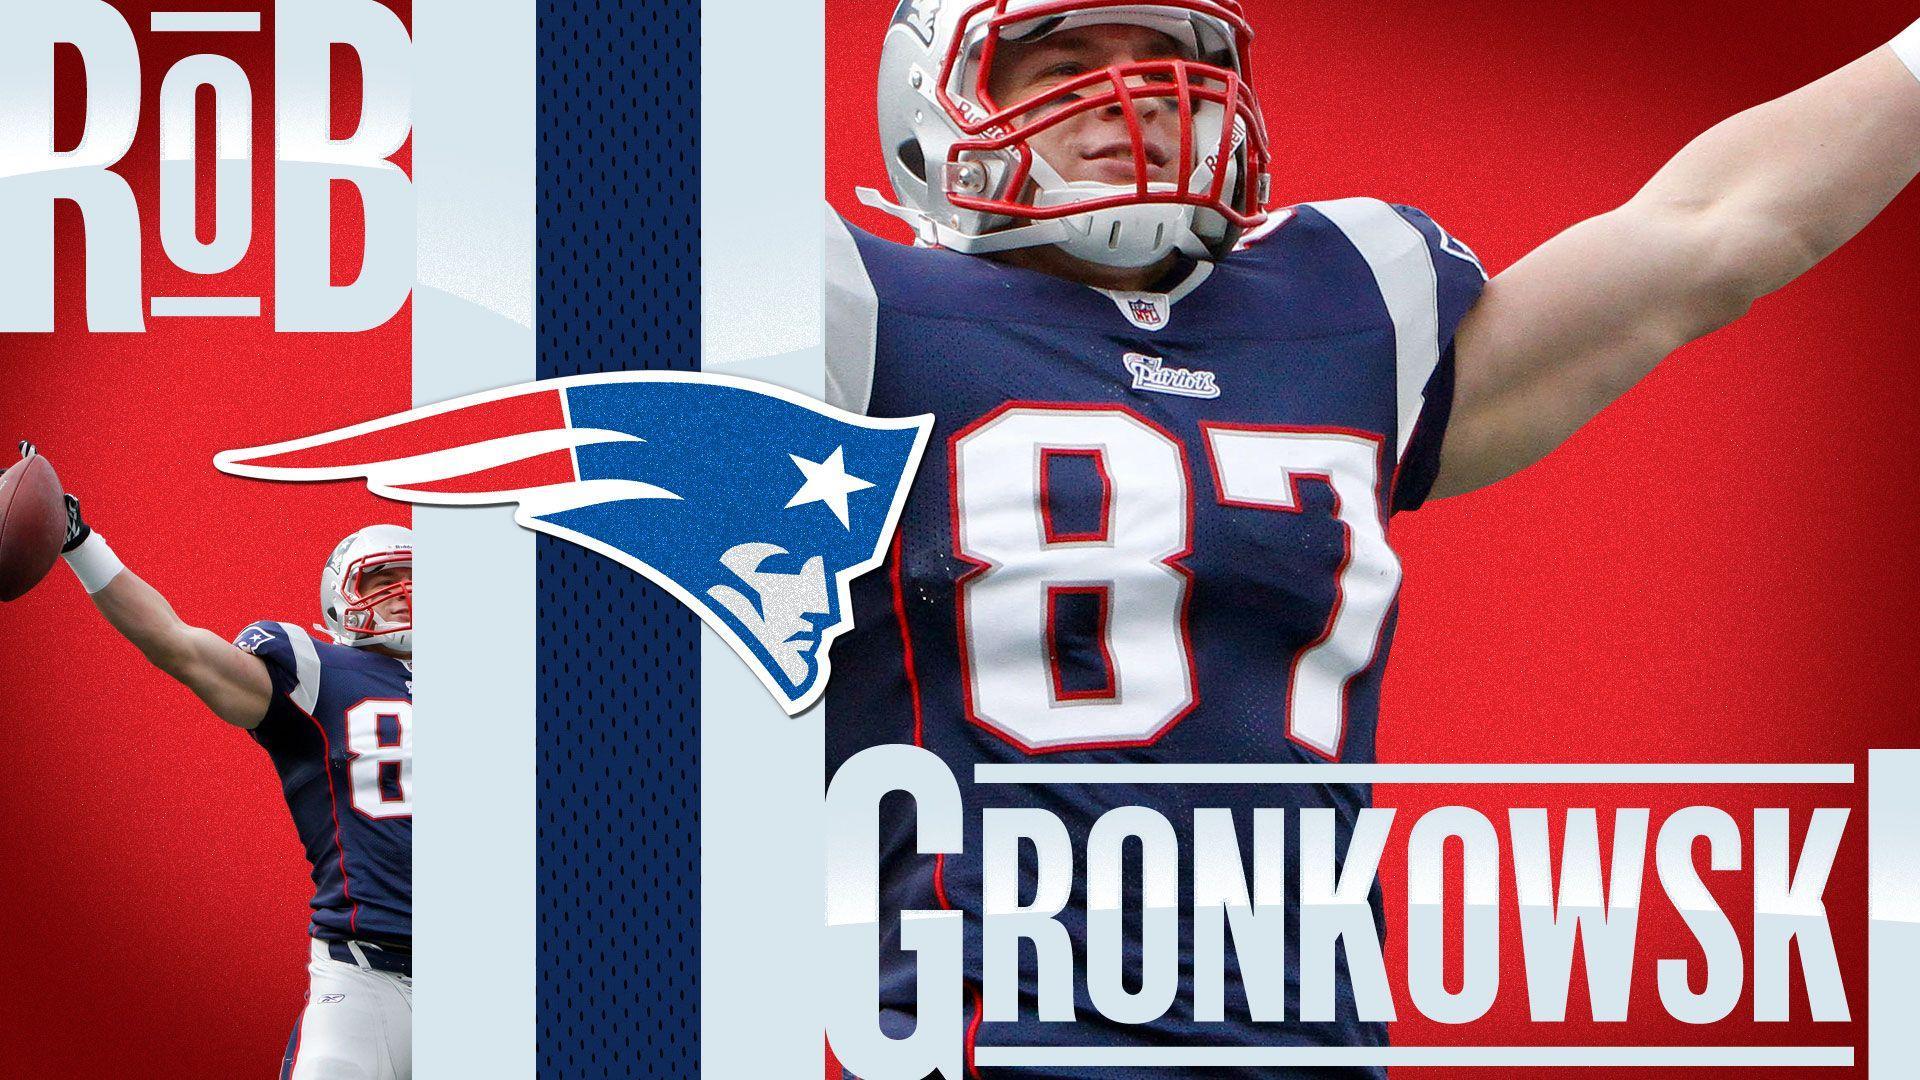 Download wallpapers 4k Rob Gronkowski grunge art Tampa Bay Buccaneers  american football NFL Robert James Gronkowski red abstract rays  linebacker Rob Gronkowski 4K Rob Gronkowski Tampa Bay Buccaneers for  desktop free Pictures